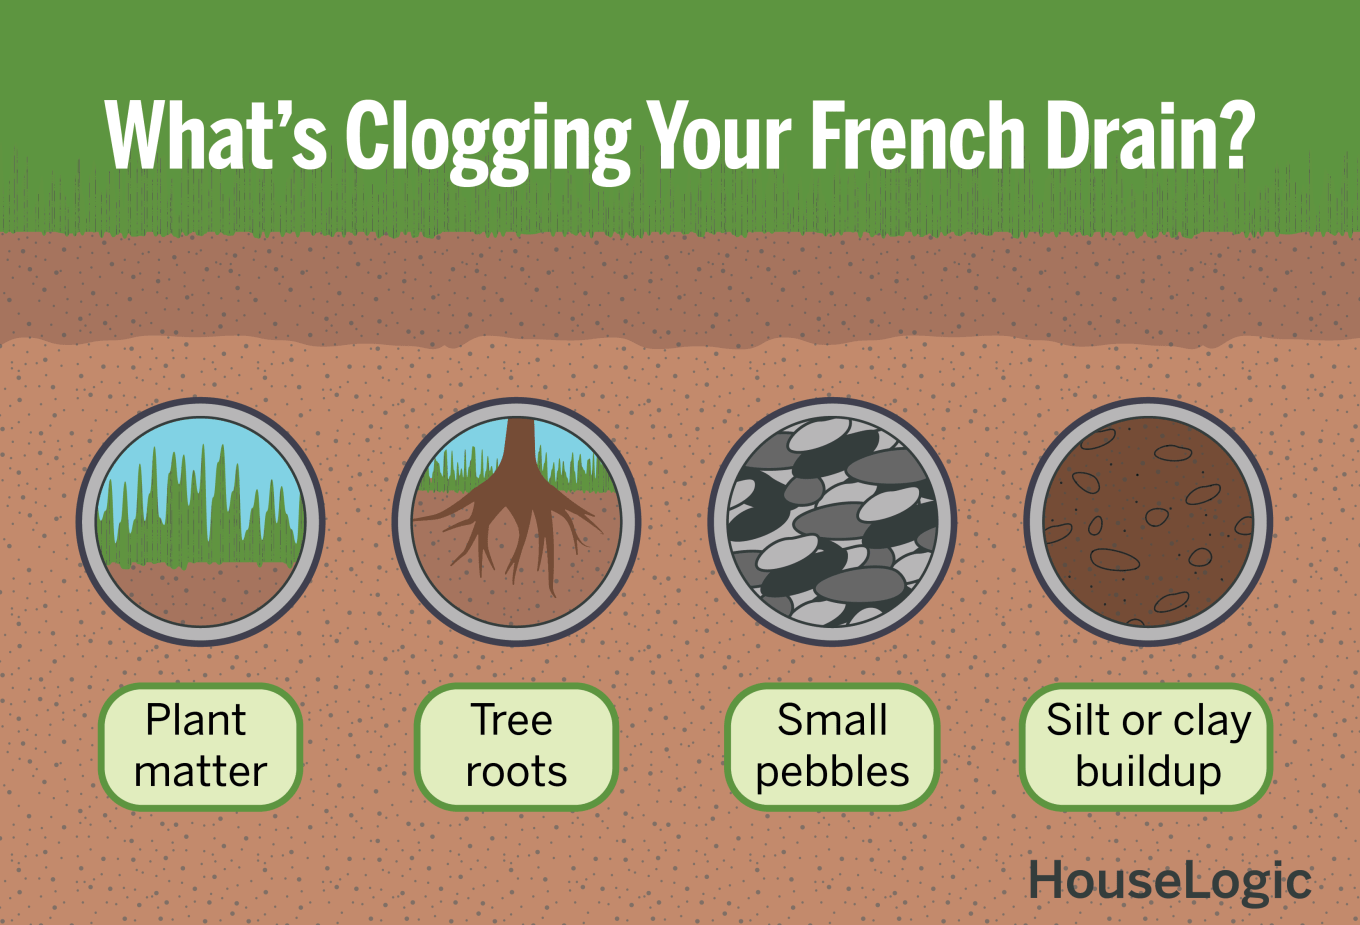 A graphic asking "What's Clogging Your French Drain?" and providing a few things like plant matter, tree roots, small pebbles, and silt or clay buildup.